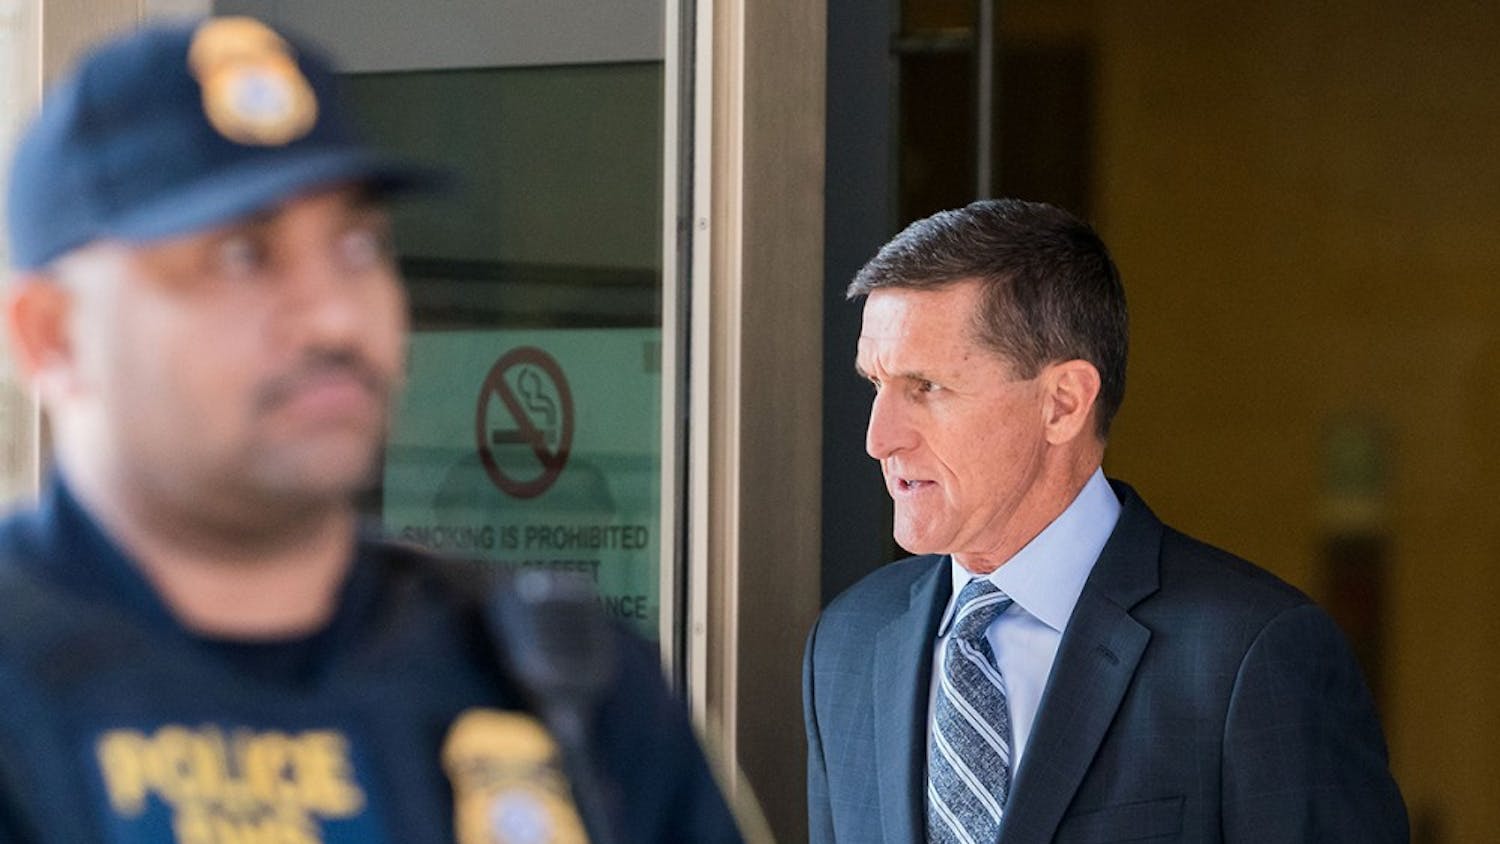 Former U.S. National Security Adviser Michael Flynn leaves the federal court following his plea hearing Friday, Dec. 1, 2017 in Washington D.C. Flynn, on Friday, pleaded guilty to lying to the Federal Bureau of Investigation regarding his improper contacts with Russia.&nbsp;